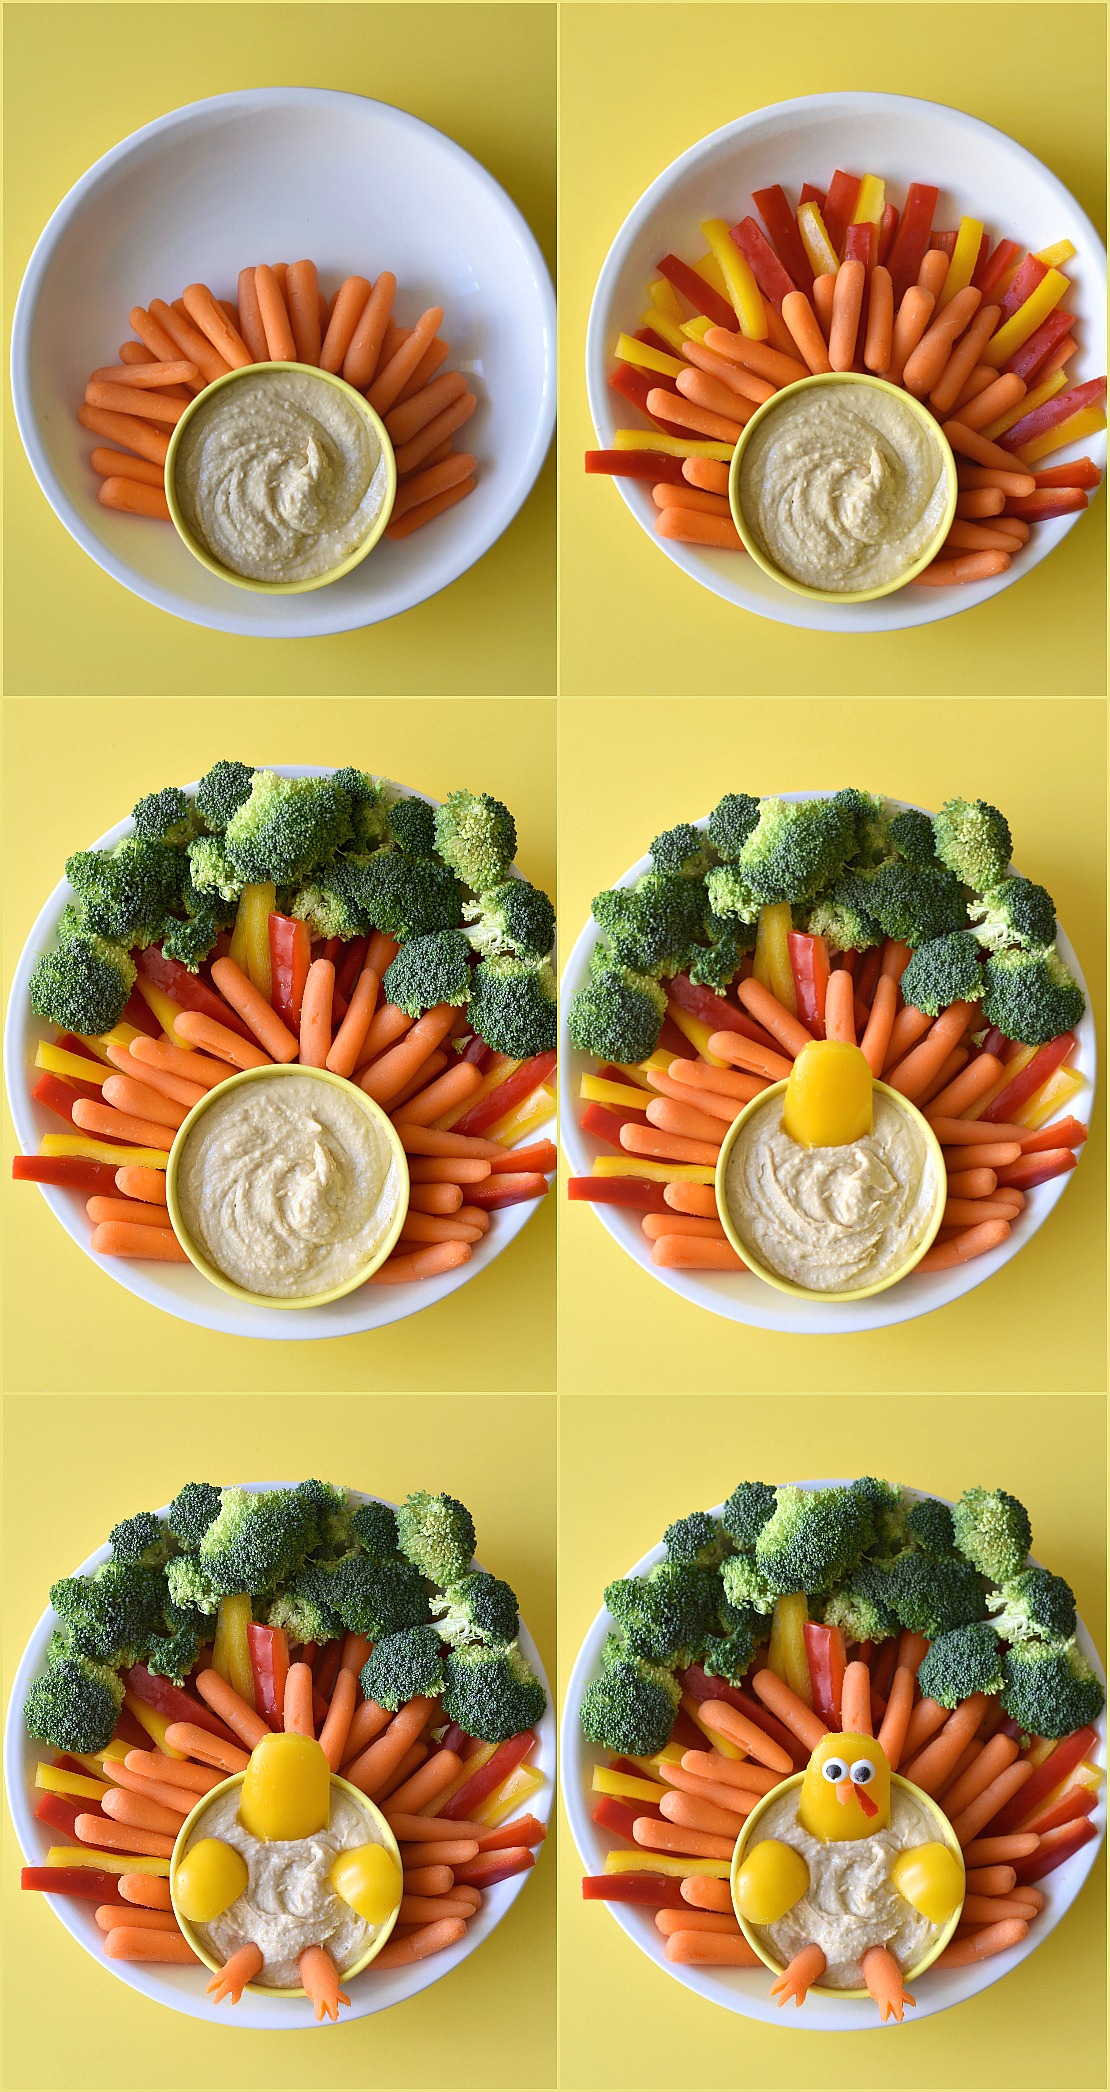 Impress your Thanksgiving party goers with the Ultimate Turkey Veggie Platter. So easy to throw together, your guests will think you spent hours on it!